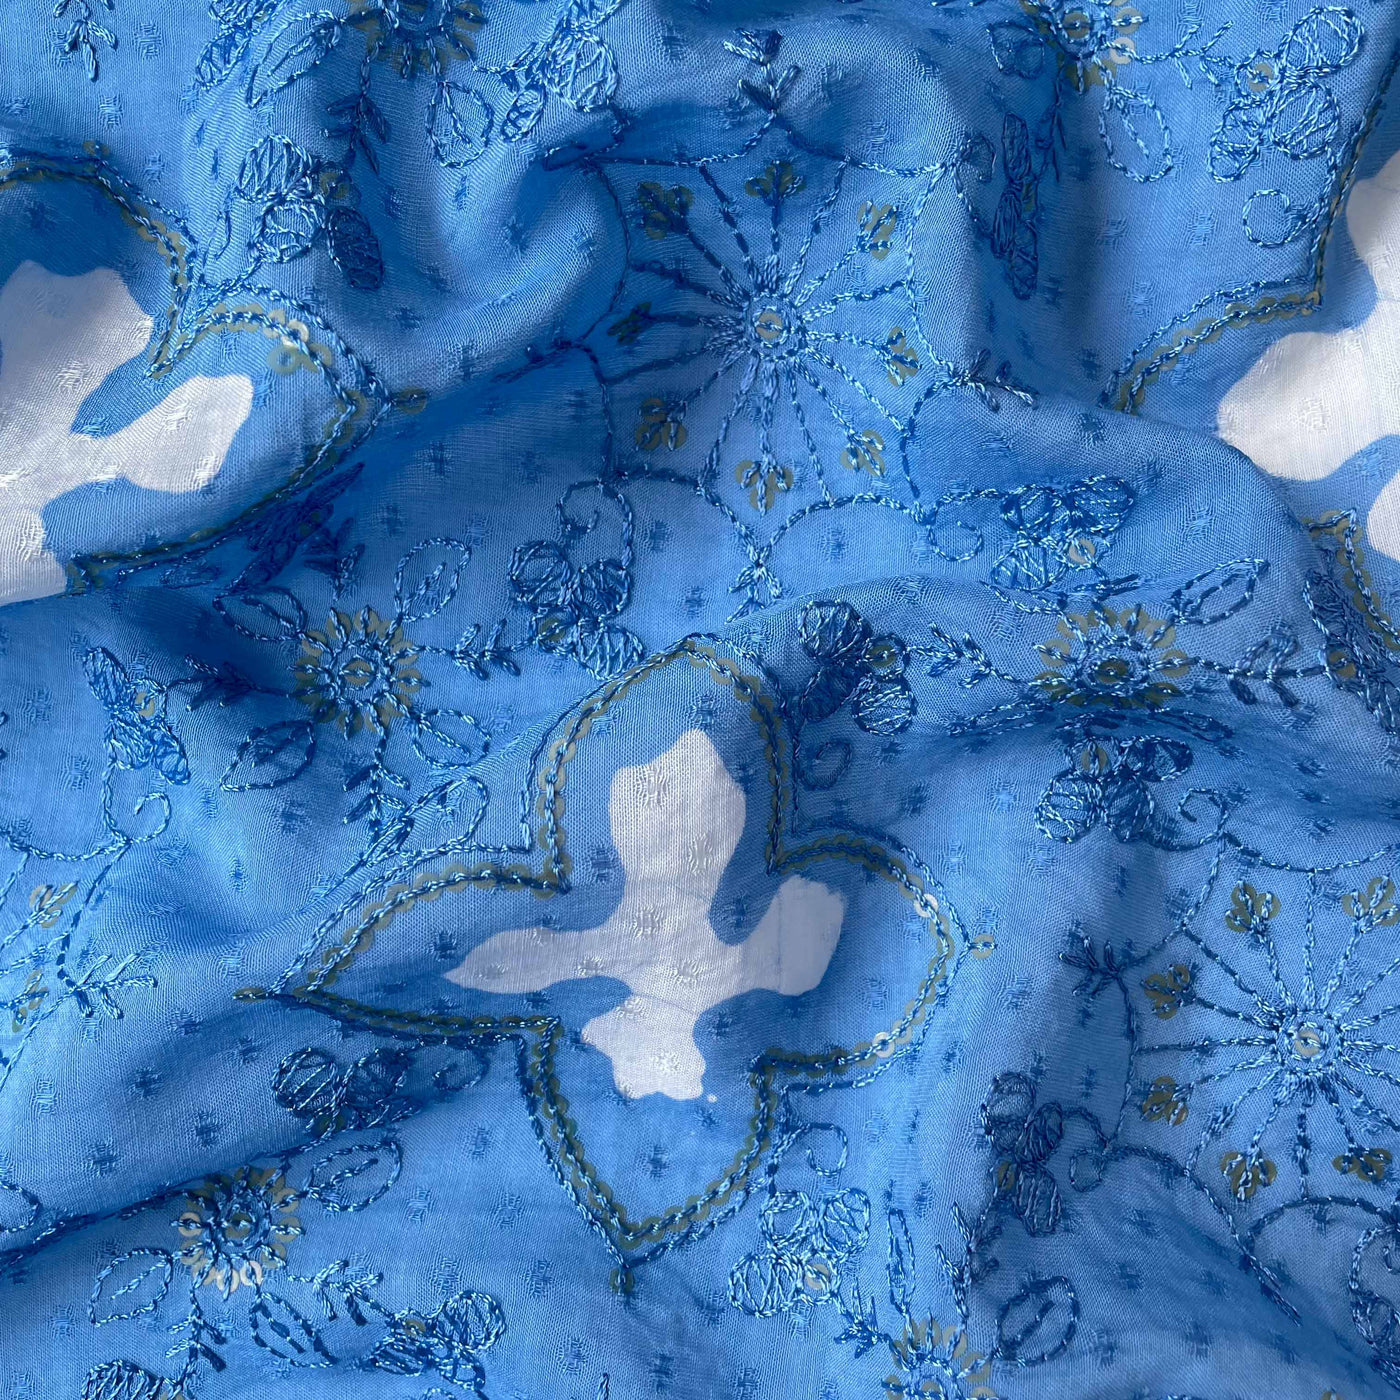 Embroidered Fabrics Fabric Sky Blue Sequence Embroidered Batik Printed Pure Cotton Dobby Butta Fabric (Width 42 Inches)